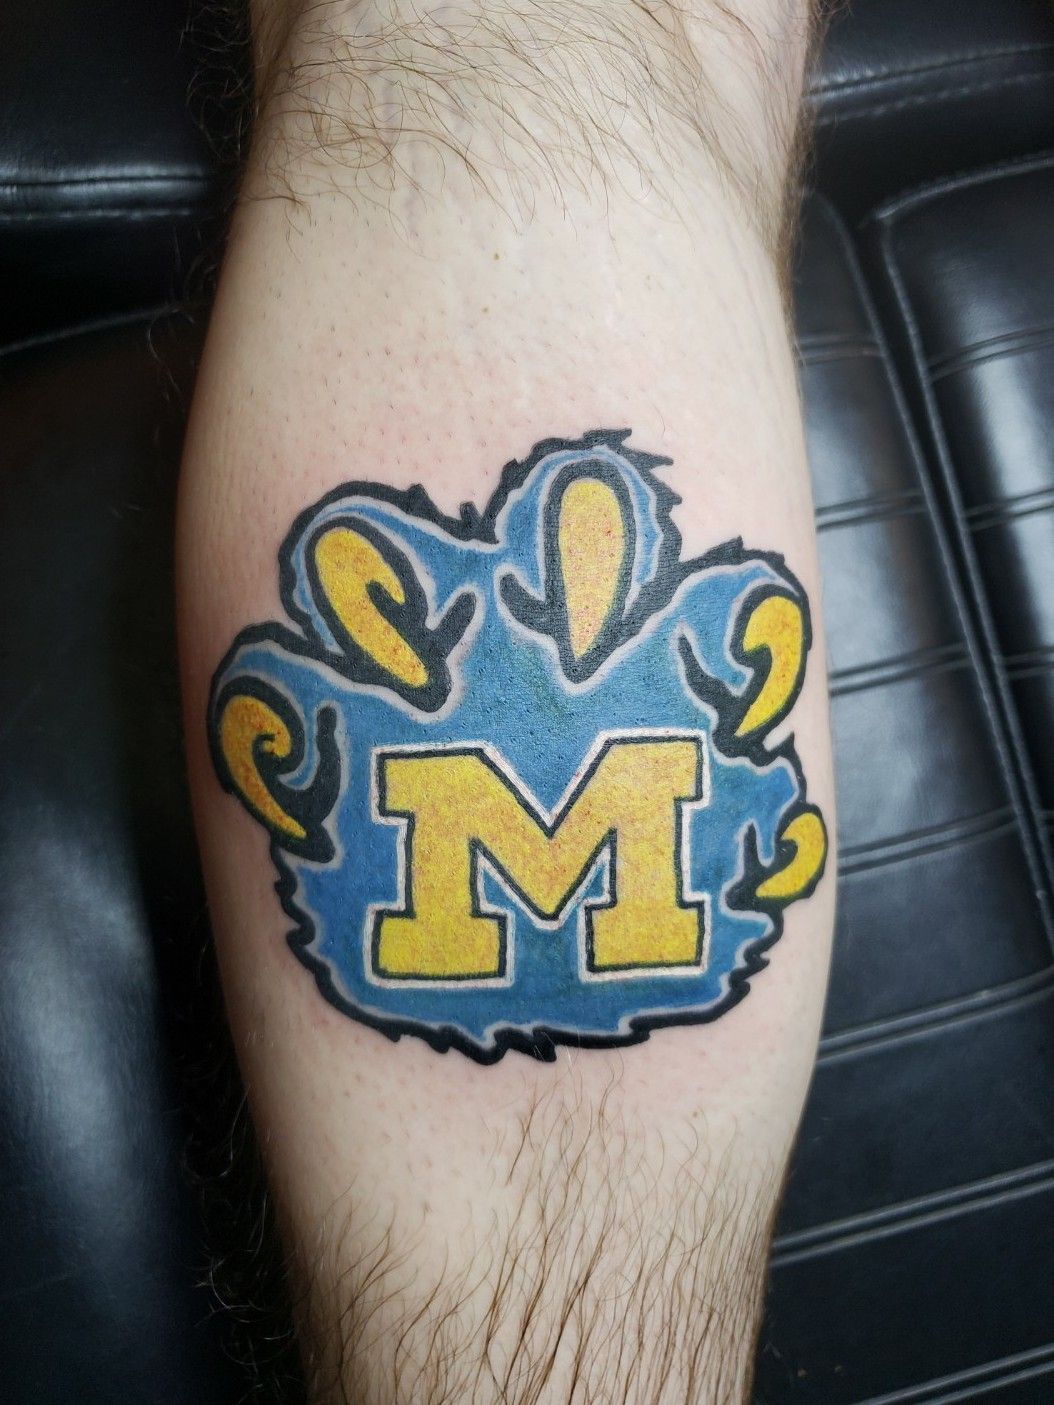 Another Michigan Design With U Of M Logo Tattoo Pictures at  Checkoutmyinkcom  M tattoos Picture tattoos Tattoos